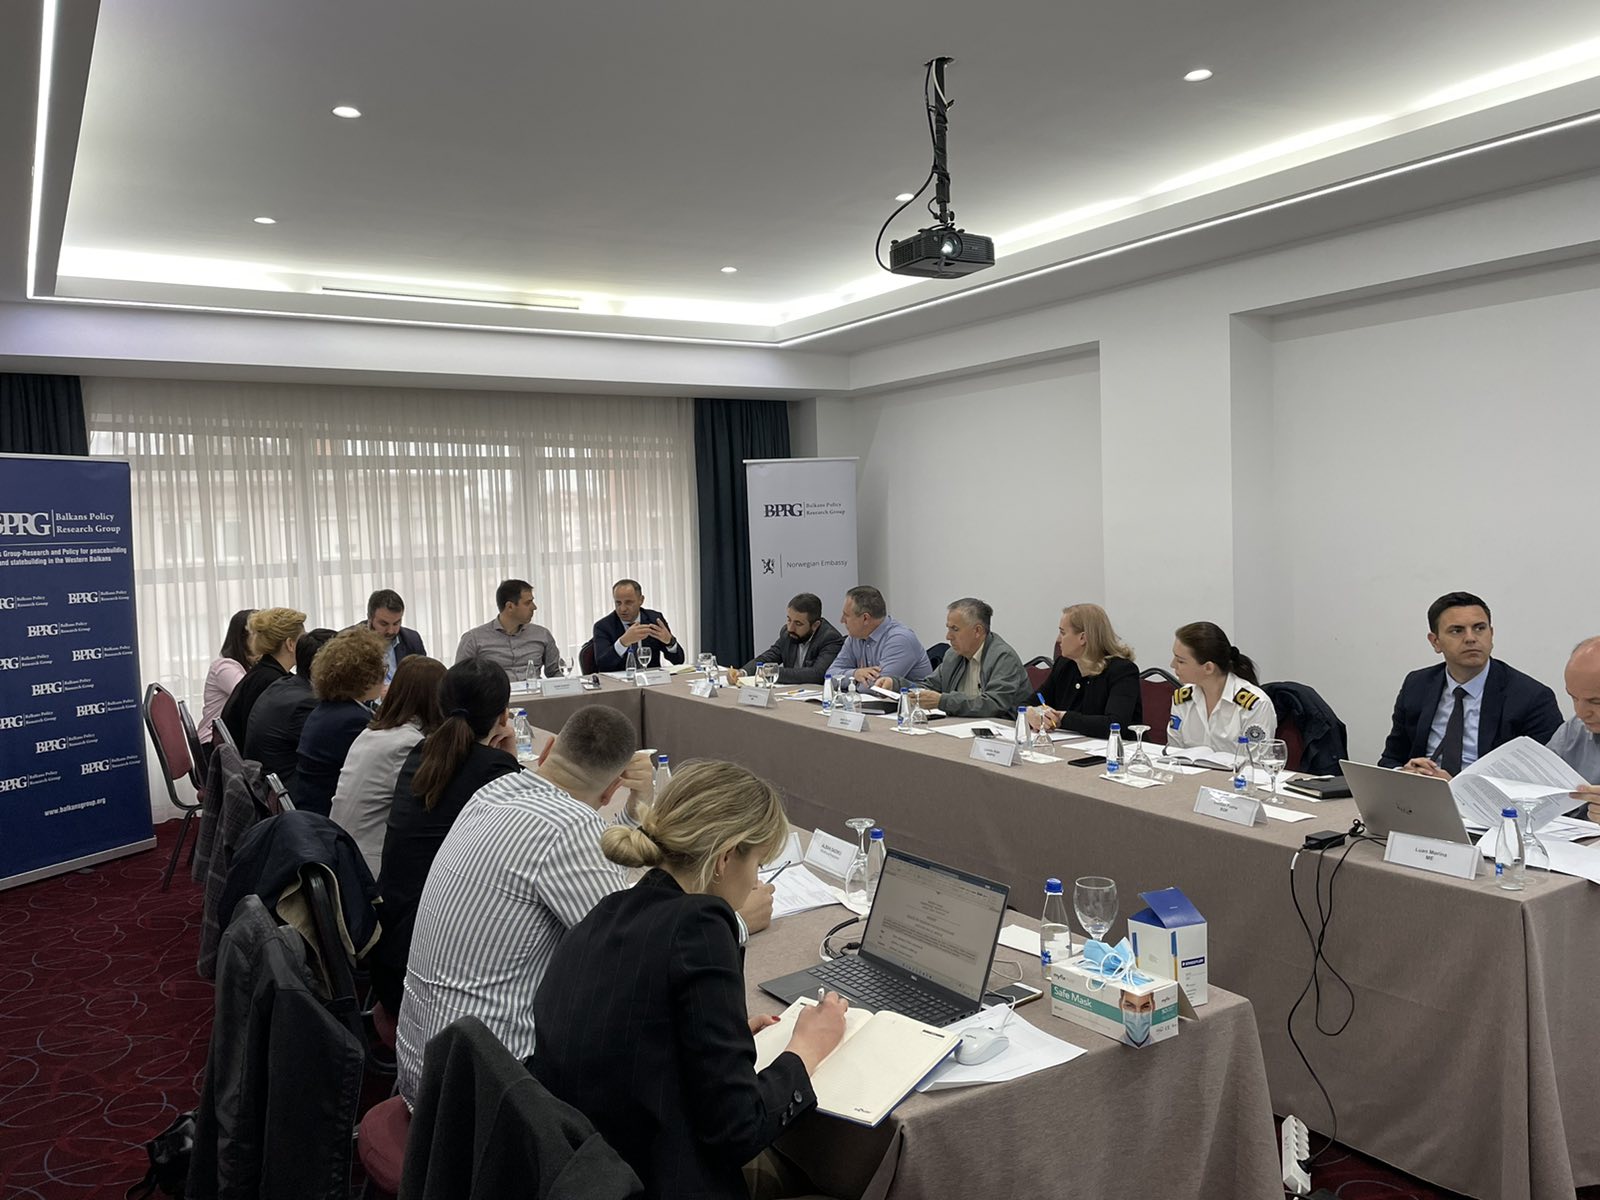 Balkans Group organized the workshop “Kosovo in Regional Initiatives: Institutional Framework and Coordination”